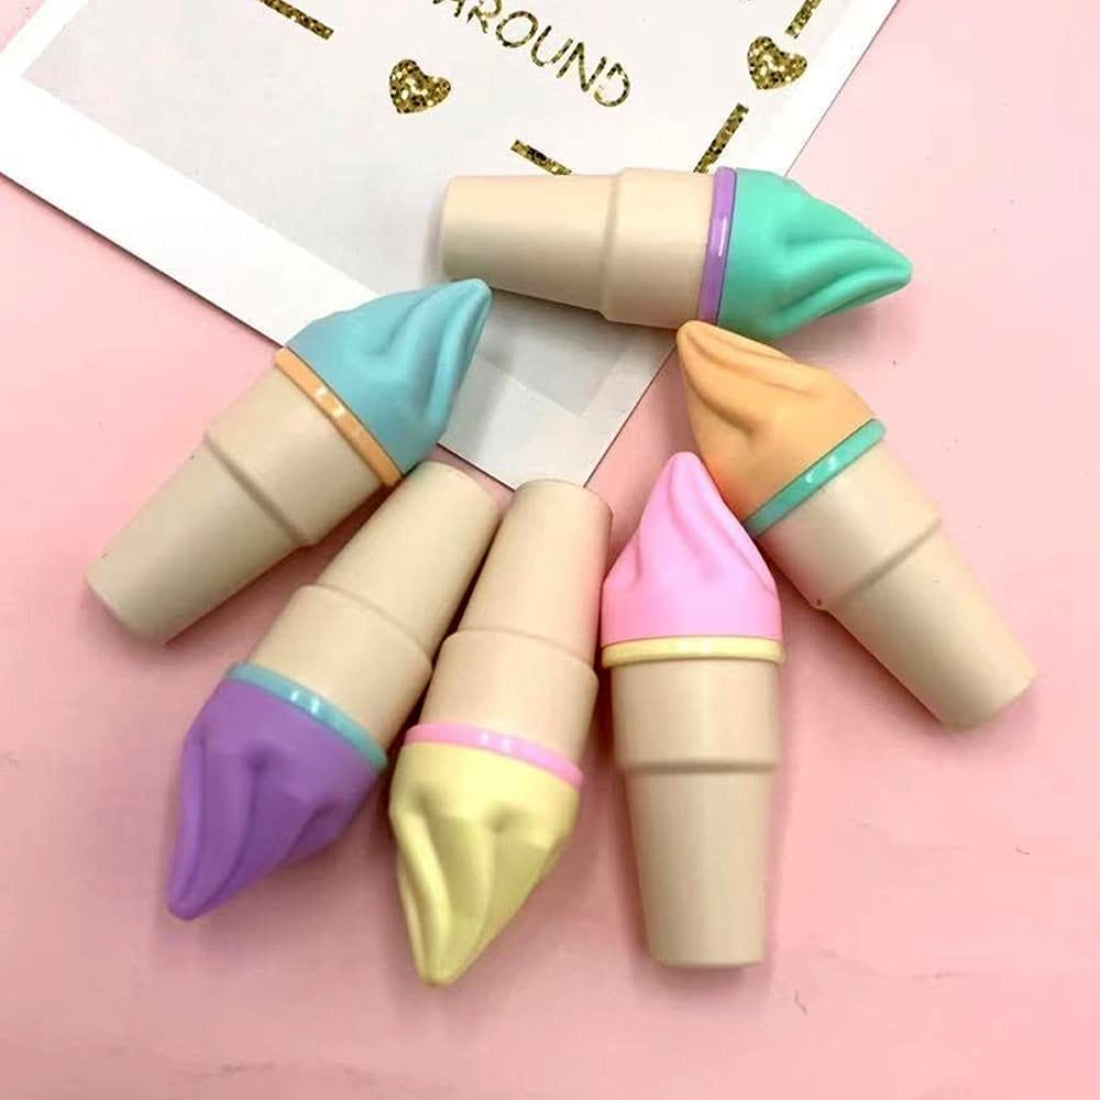 Sweet Cone Highlighters 6Pc.